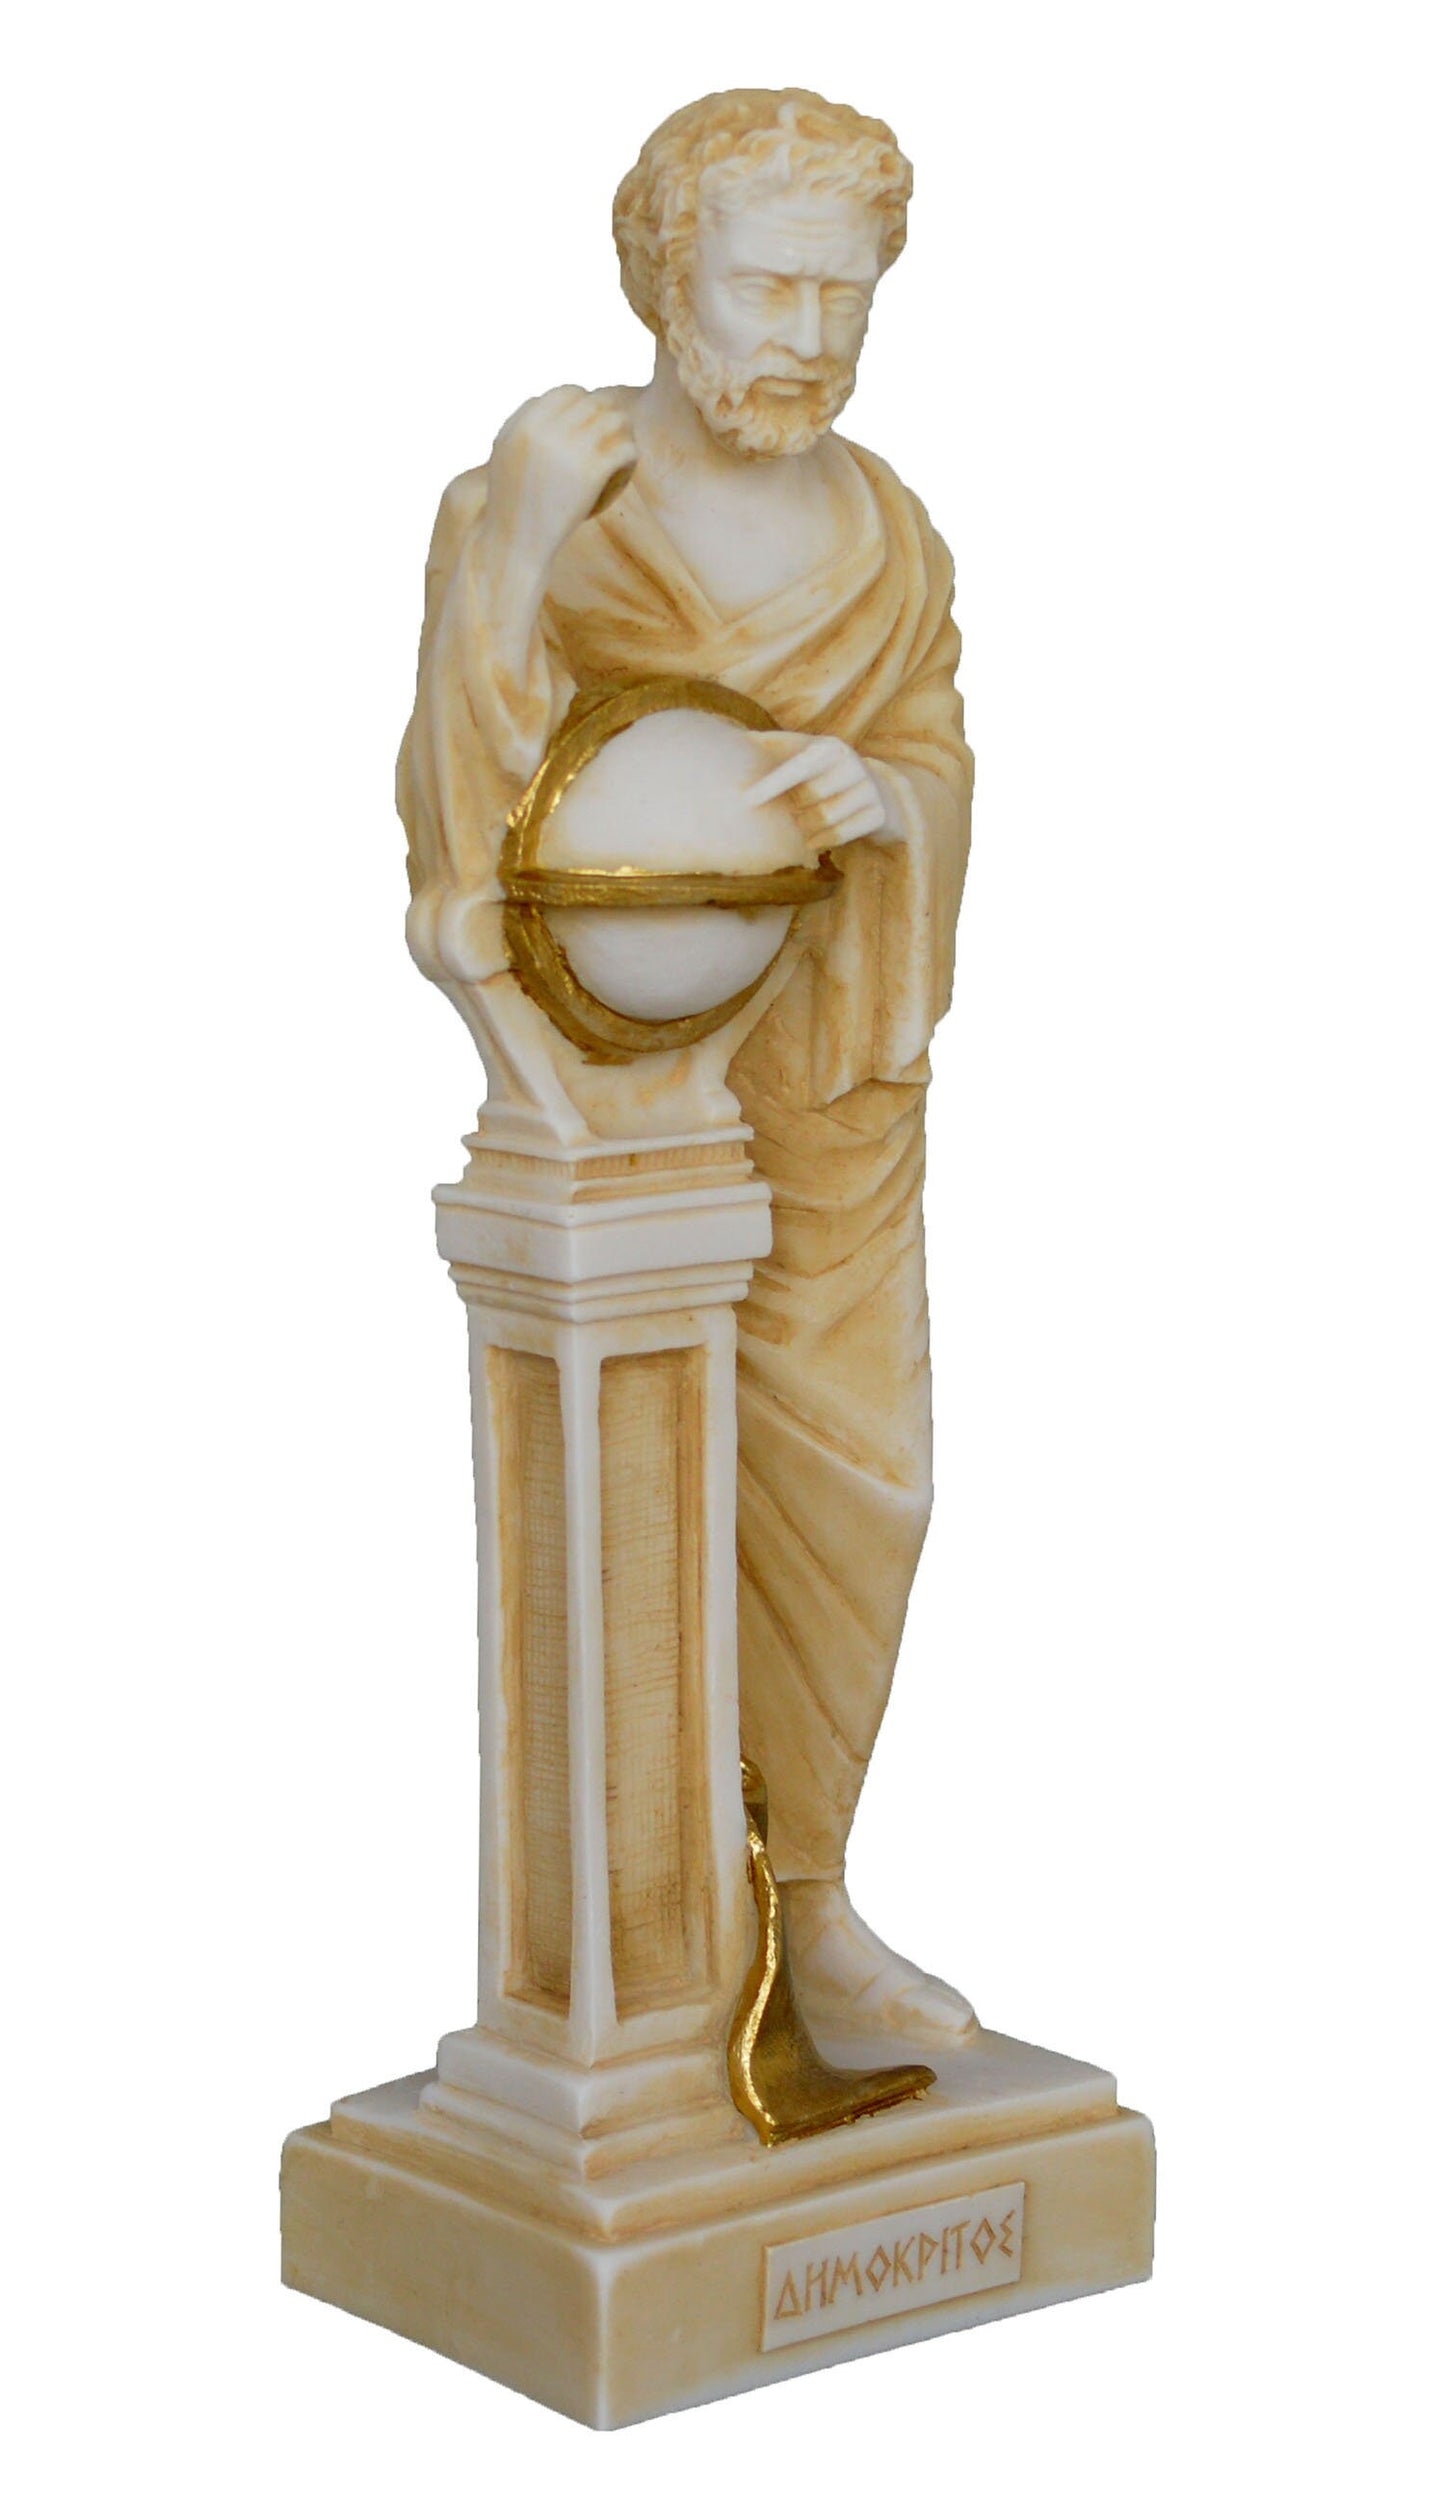 Democritus - Ancient Greek Philosopher, Scientist - Atomic Theory of the Universe - Aged Alabaster Statue